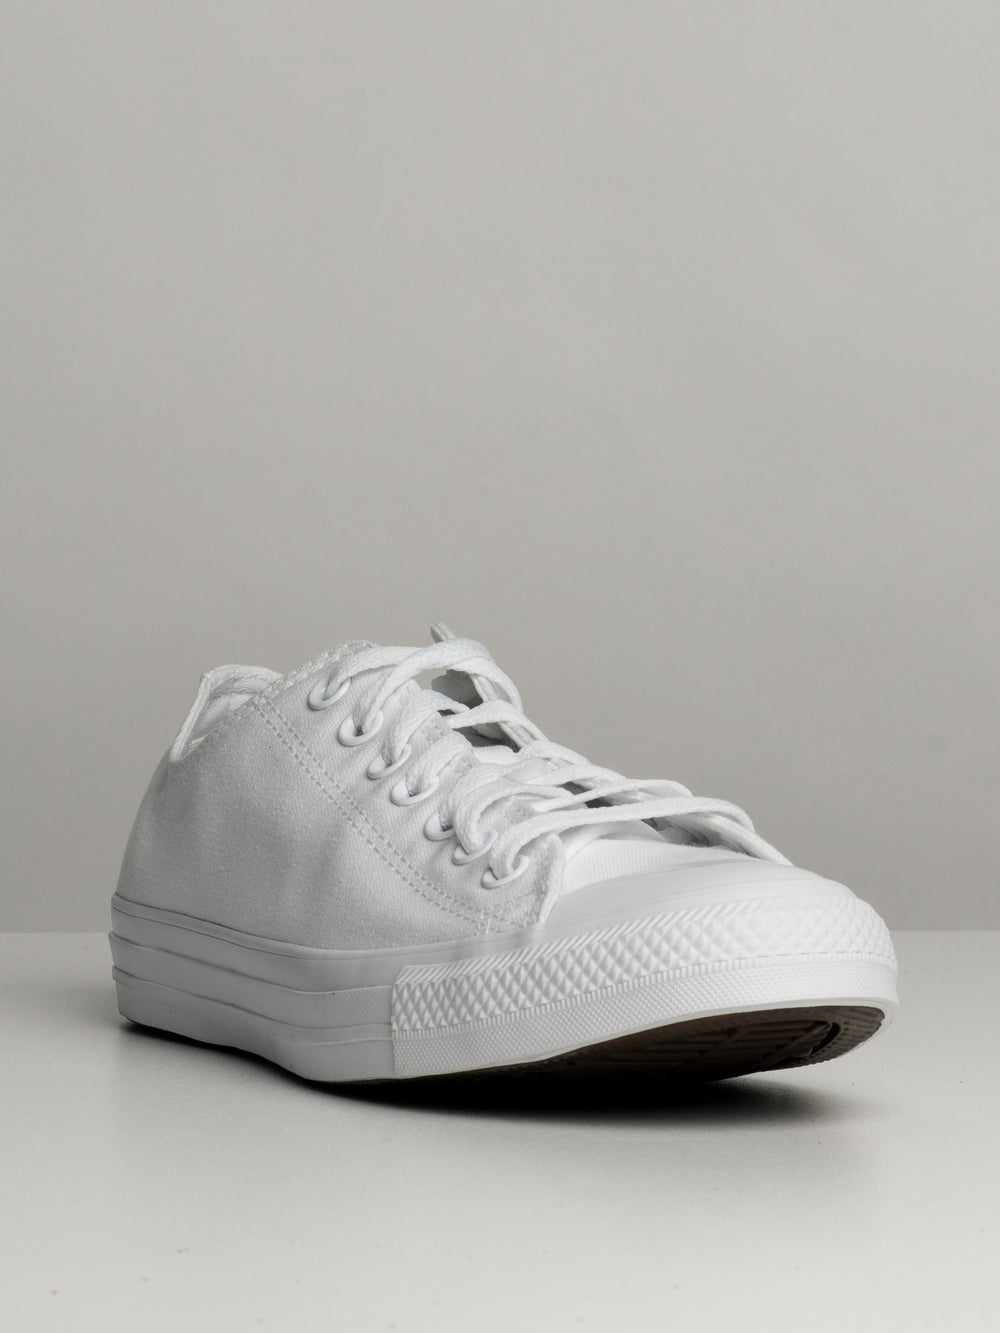 MENS CONVERSE CTAS OX CANVAS SNEAKERS - CLEARANCE